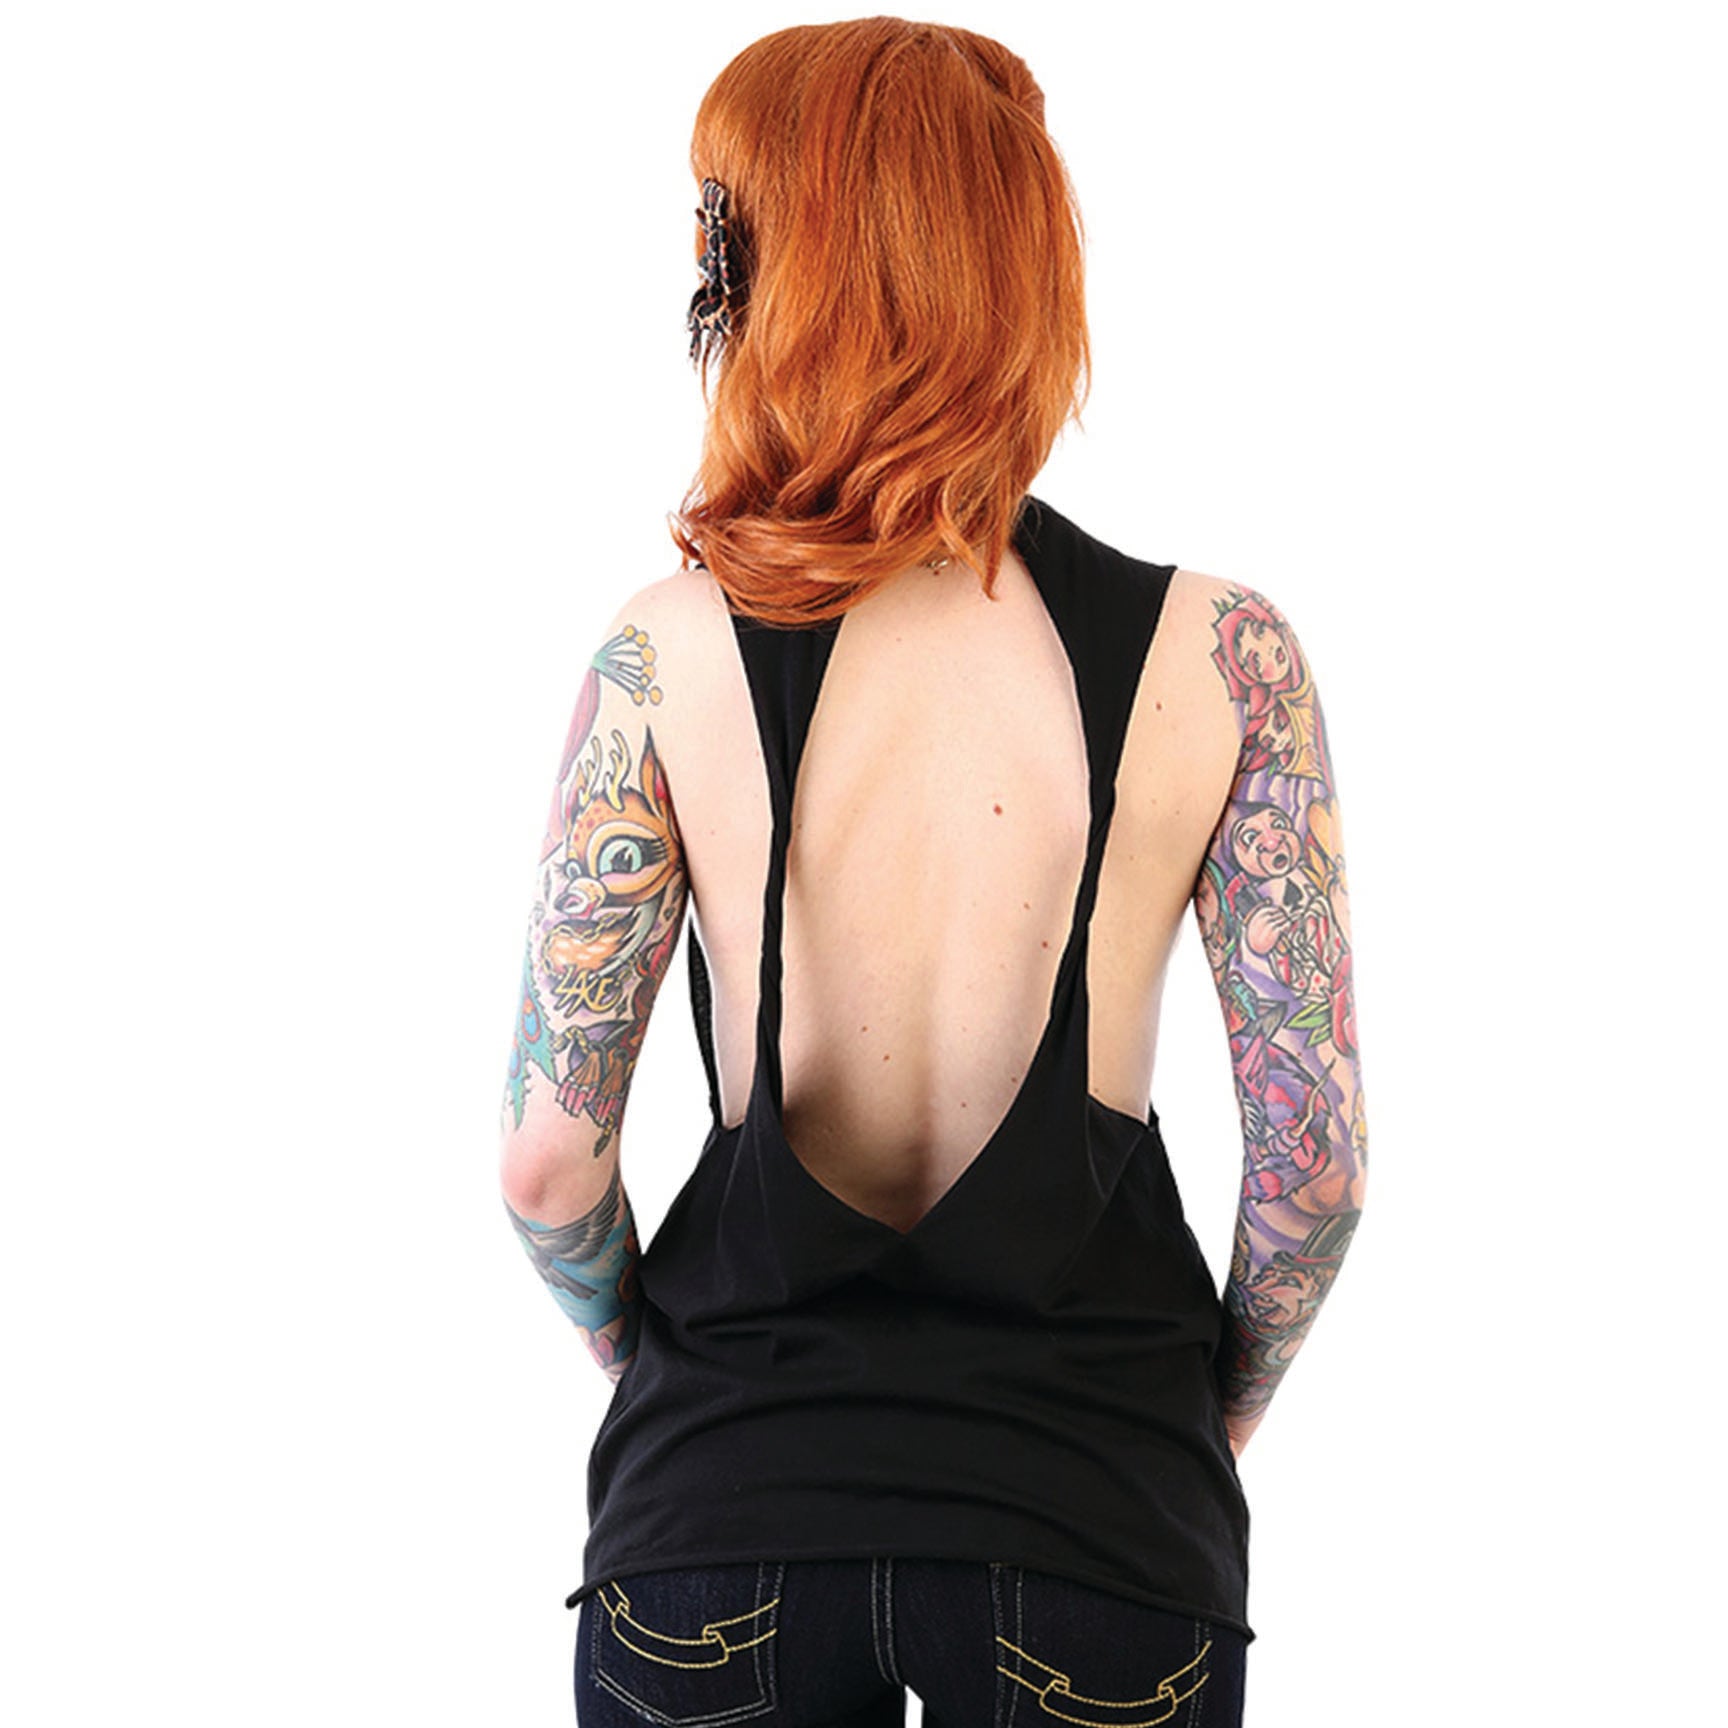 The UNDERWATER RODEO Twist Back Tank - ONLY SIZE 2XL AVAILABLE!